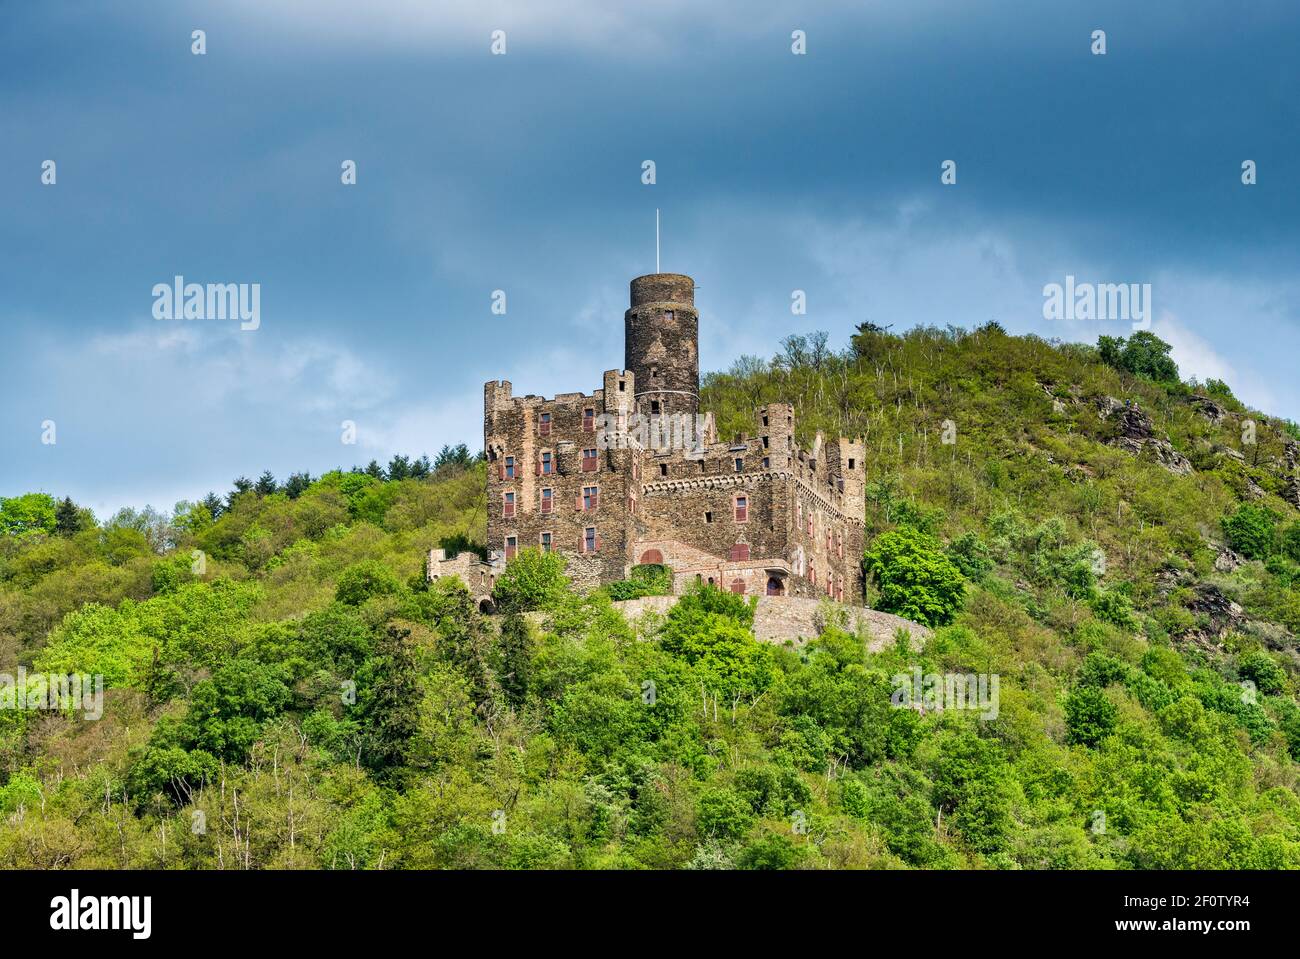 Maus Castle, toll castle with bergfried, Upper Middle Rhine Valley, village of Wellmich, municipality of St Goarshausen, Rhineland-Palatinate, Germany Stock Photo